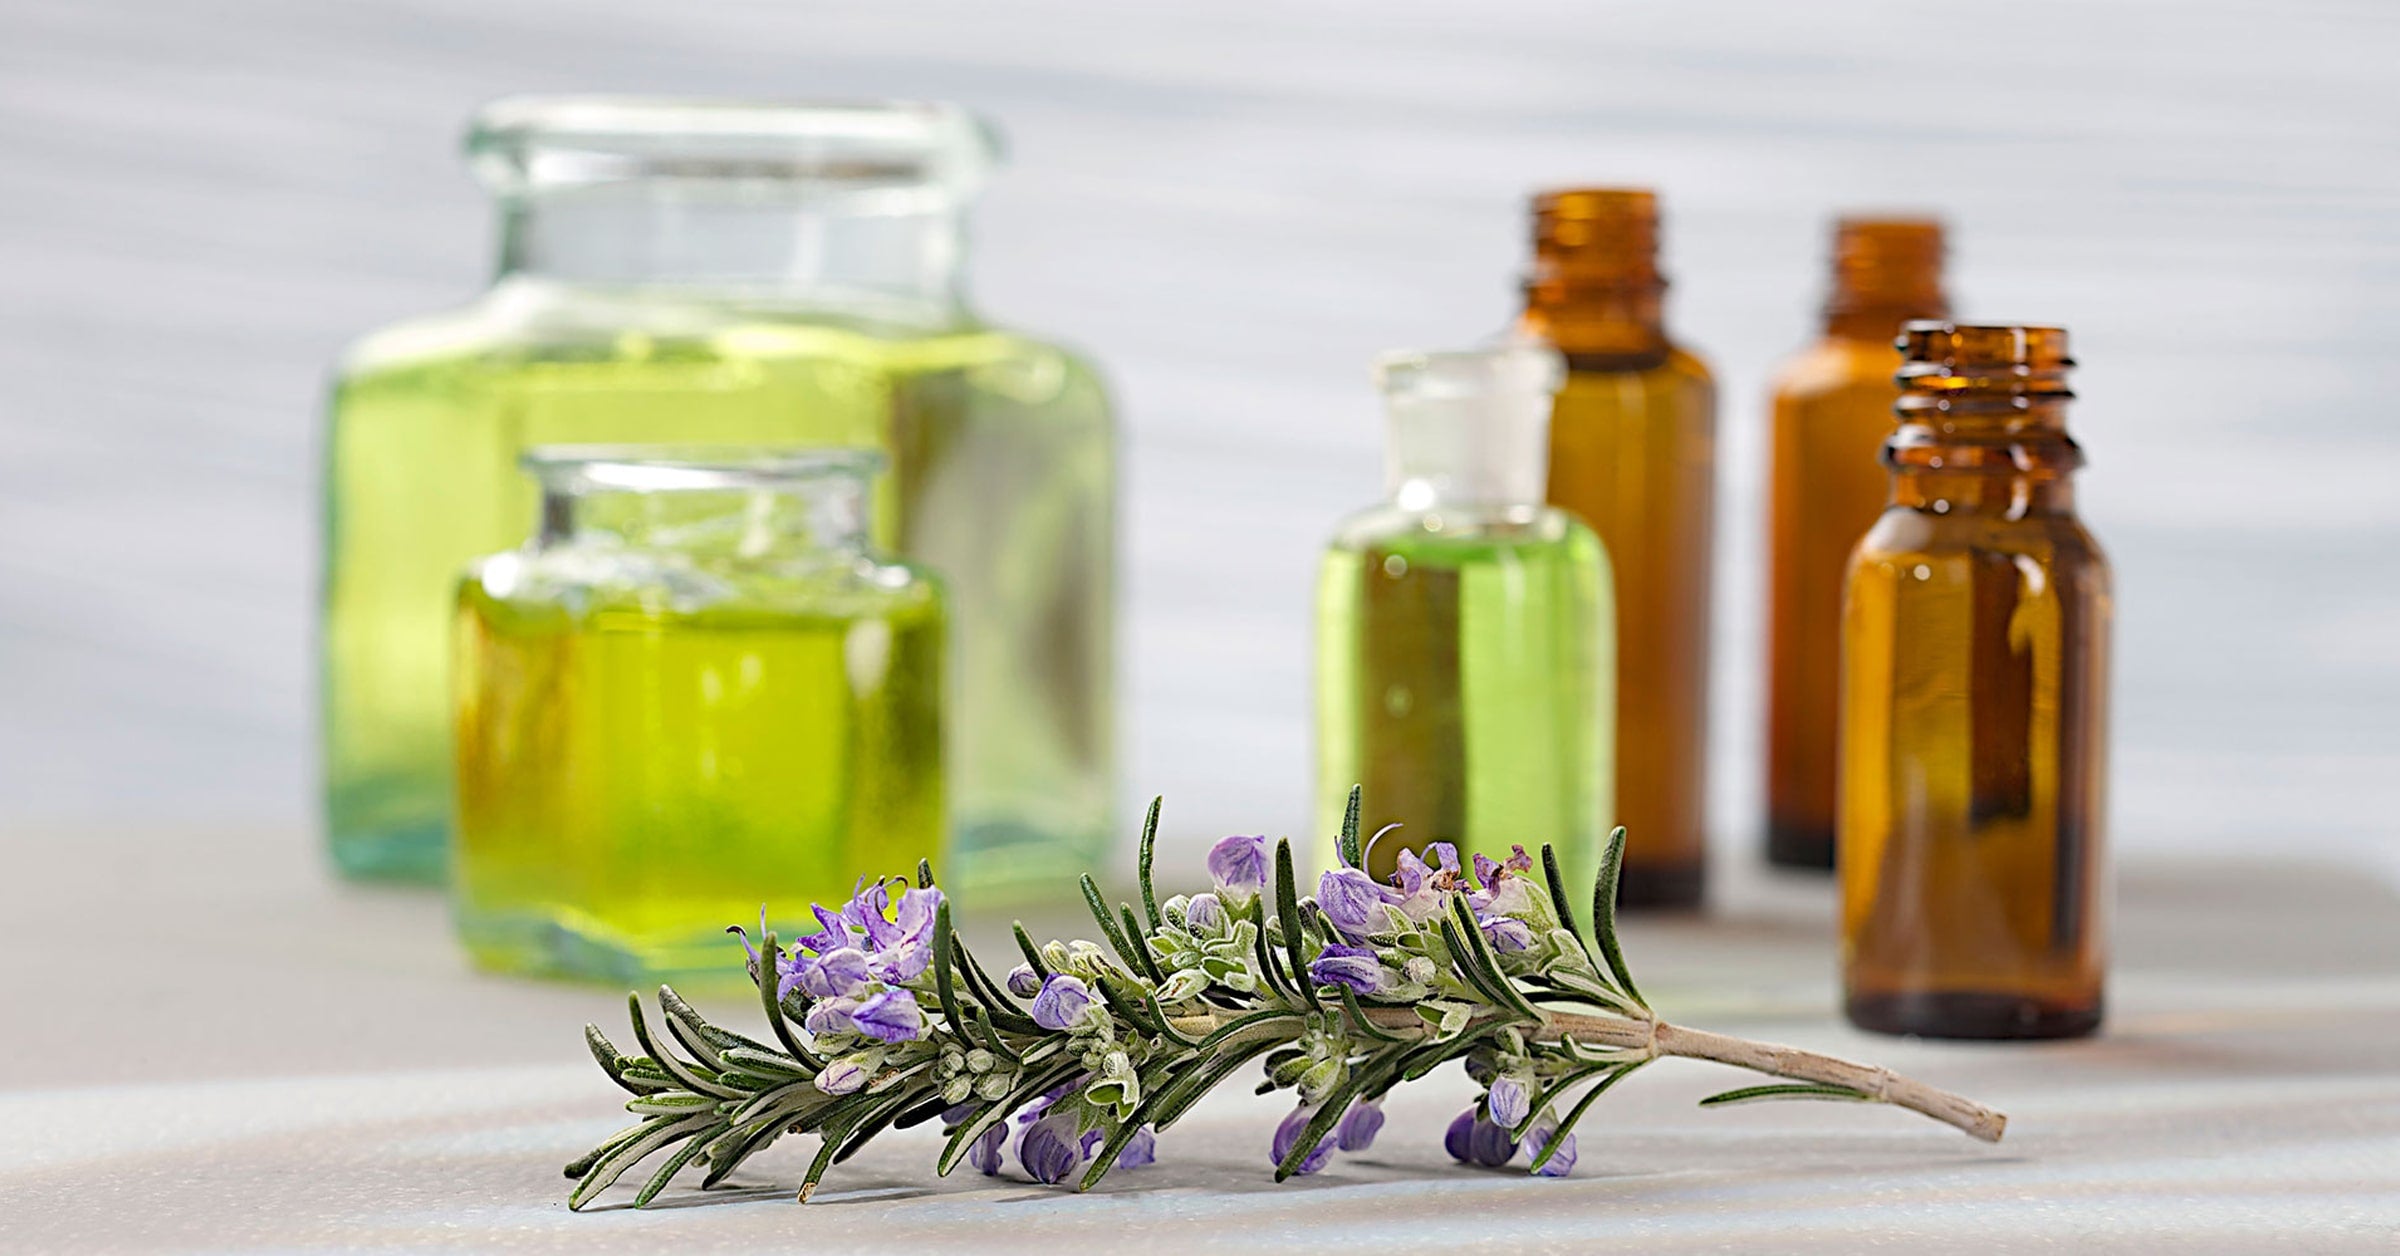 How to Make Your Own Signature Perfume With Essential Oils